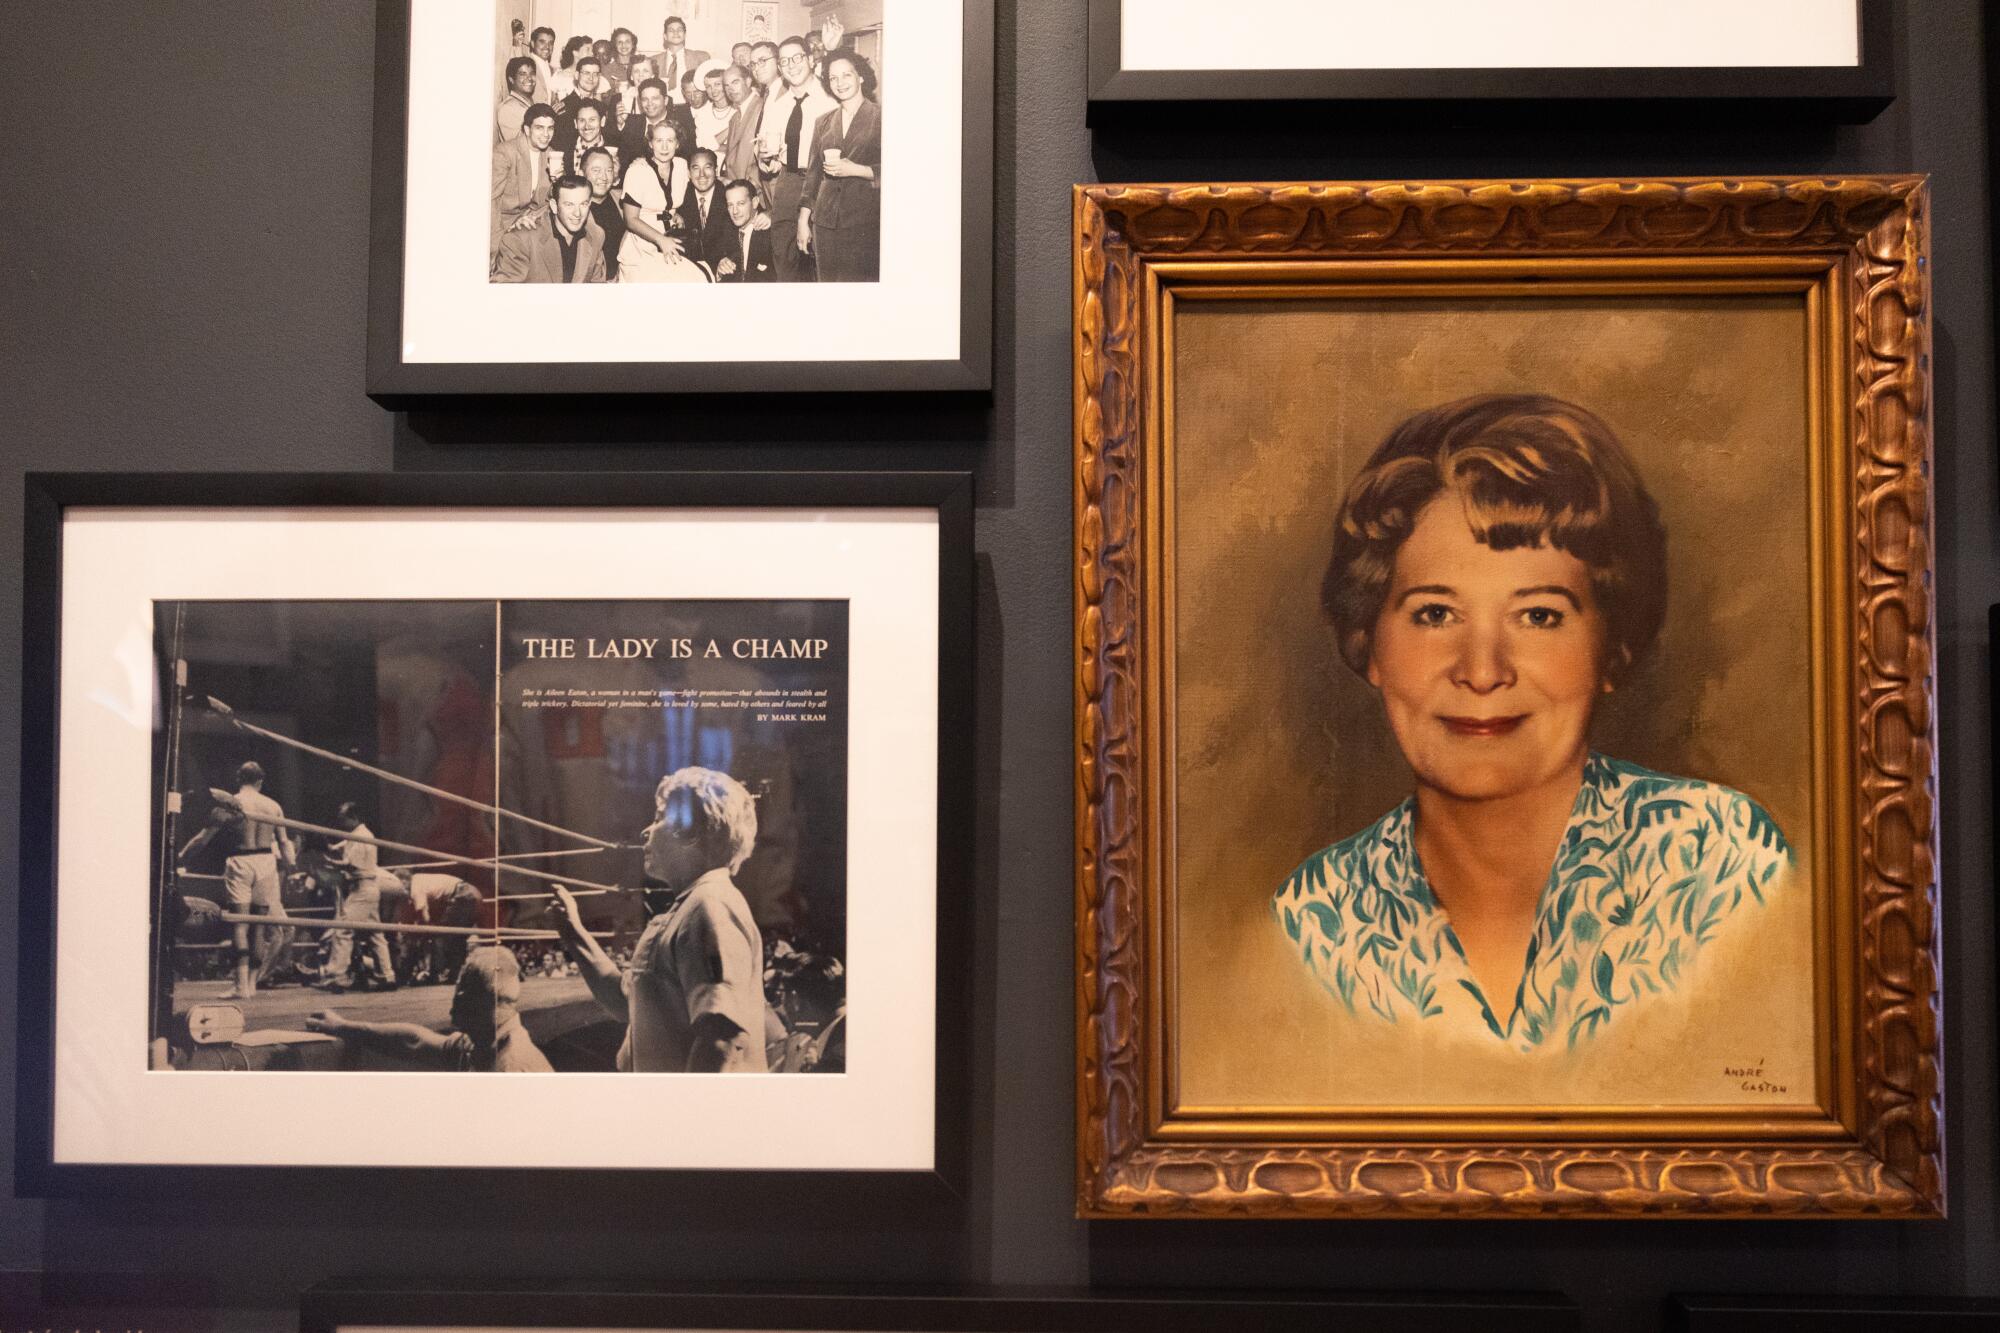 A photograph and painting of Aileen Eaton, who was active with the Olympic Auditorium from 1942-1980 hangs in the exhibit 